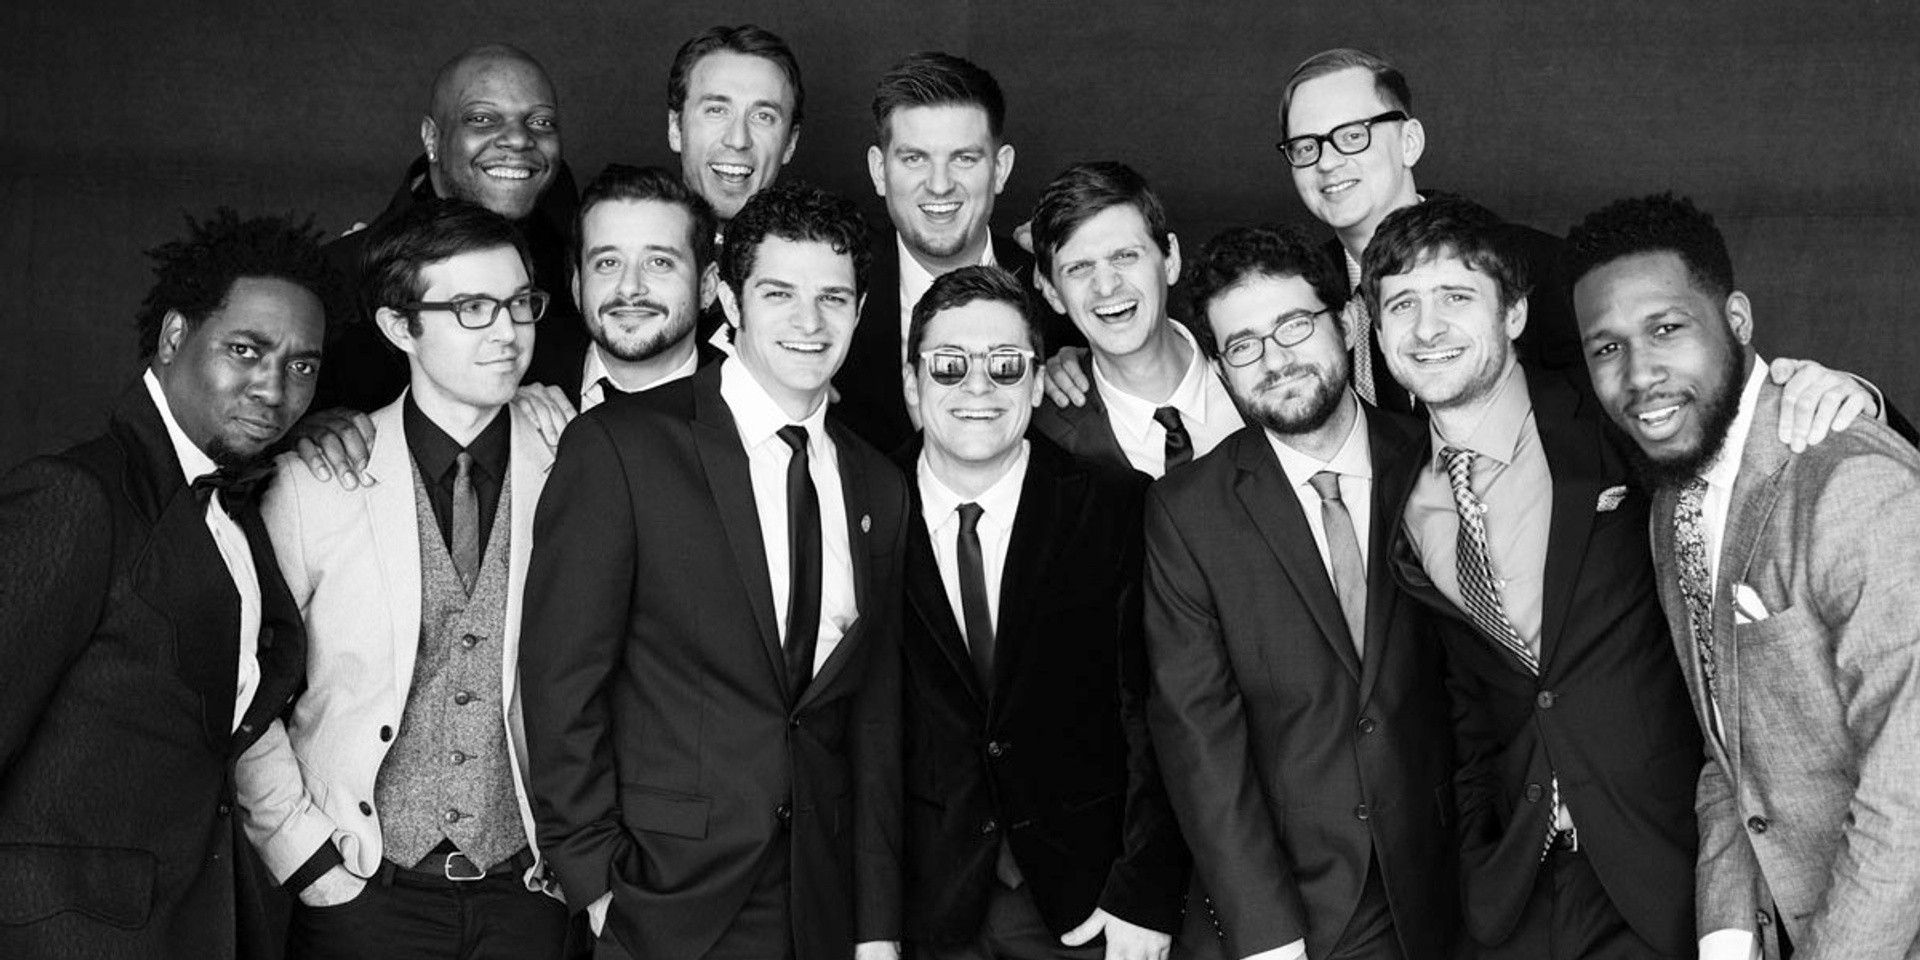 Snarky Puppy returns to Singapore this year